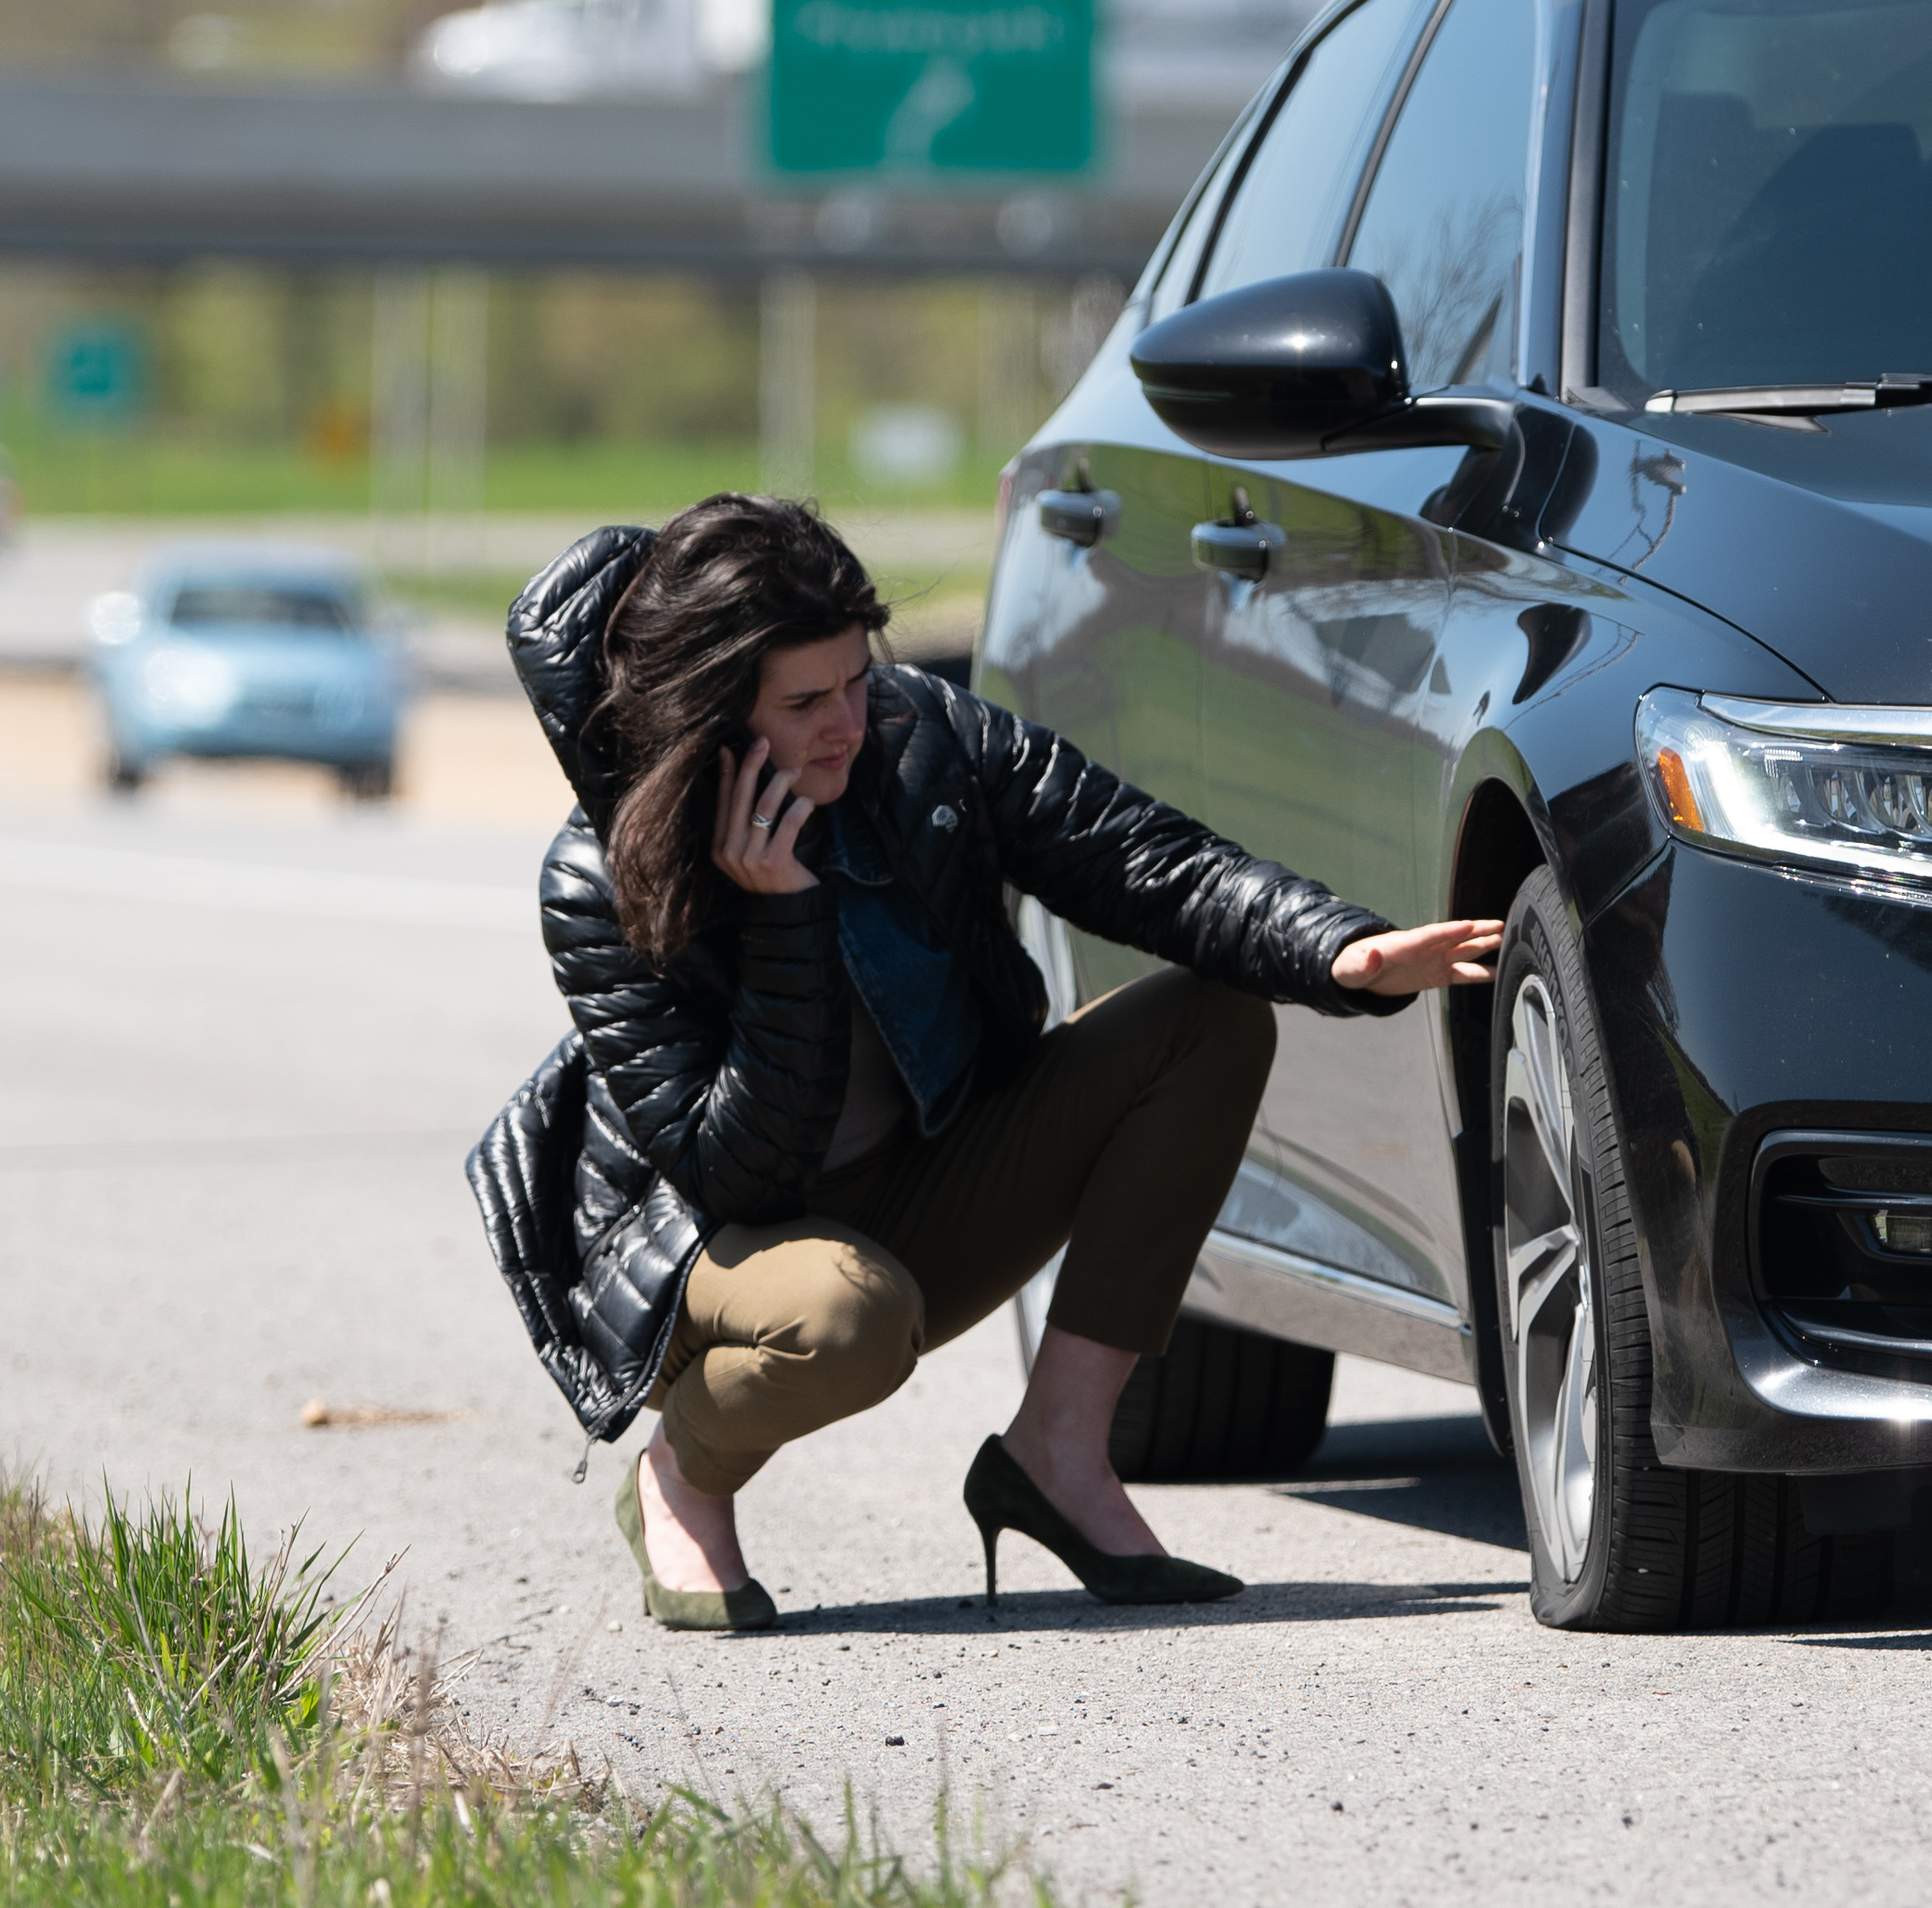 Image of woman experiencing flat tire on expressway